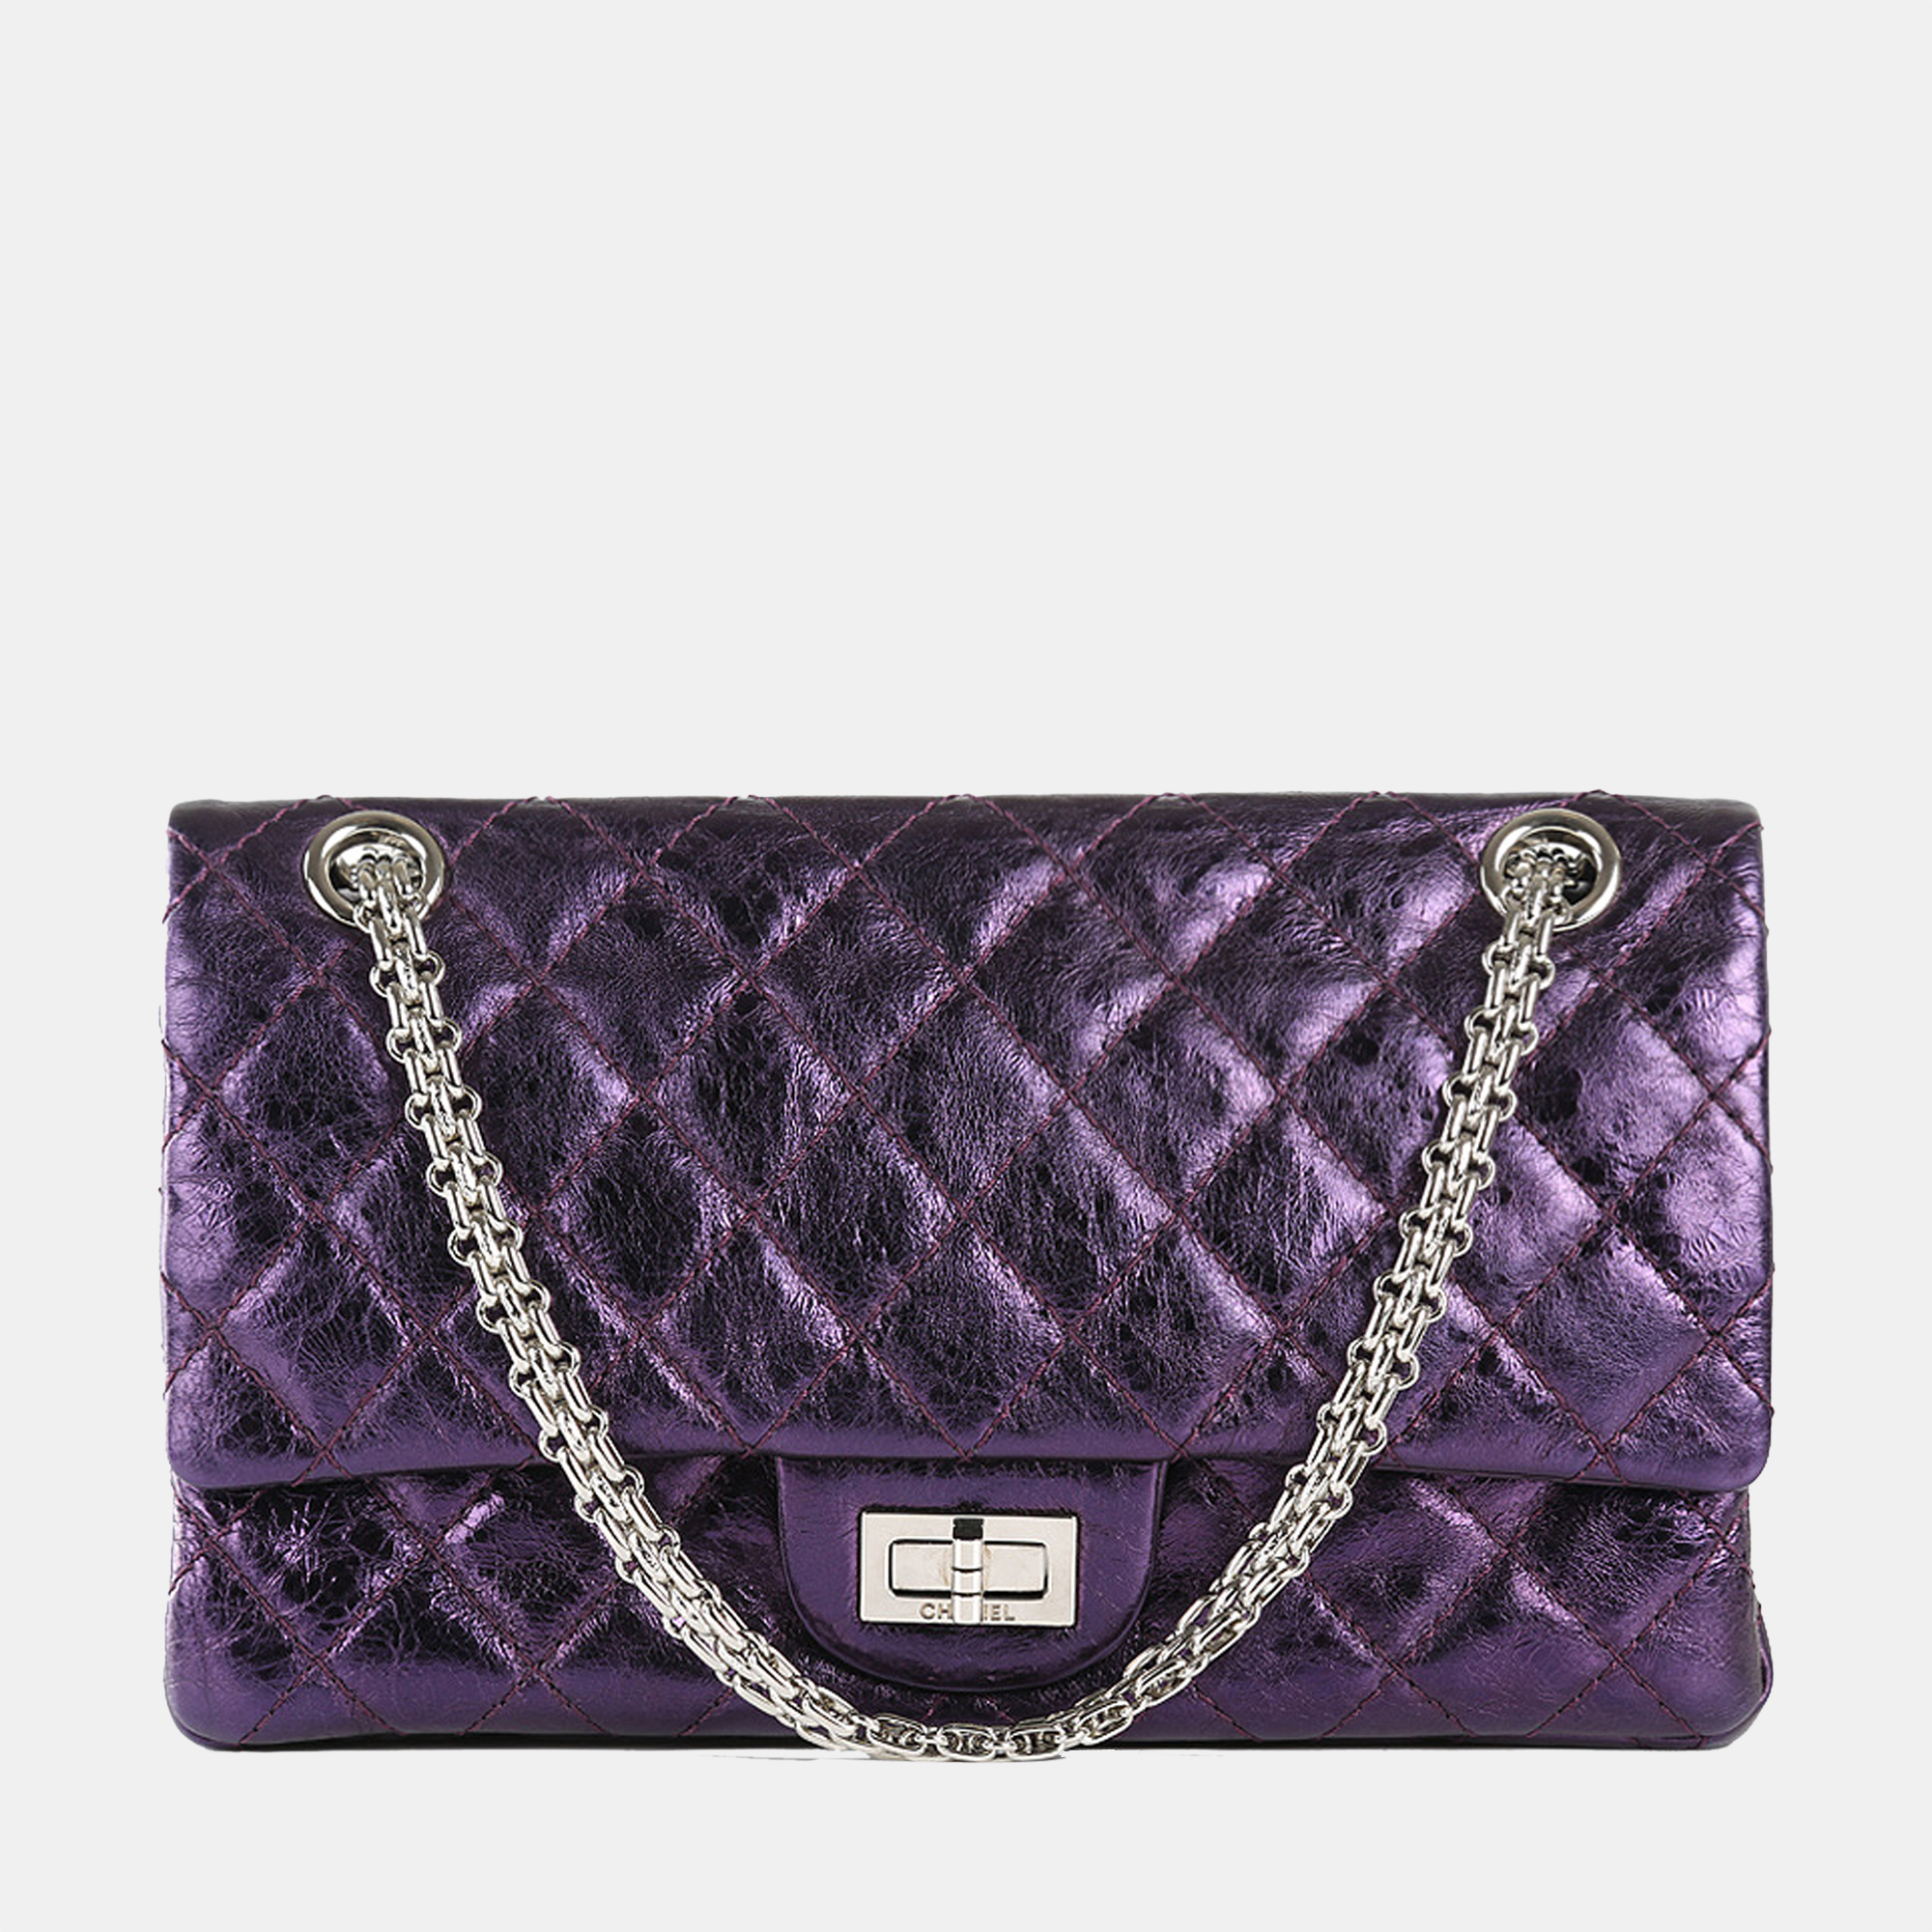 Pre-owned Chanel Metallic Purple Quilted Aged Calfskin Leather